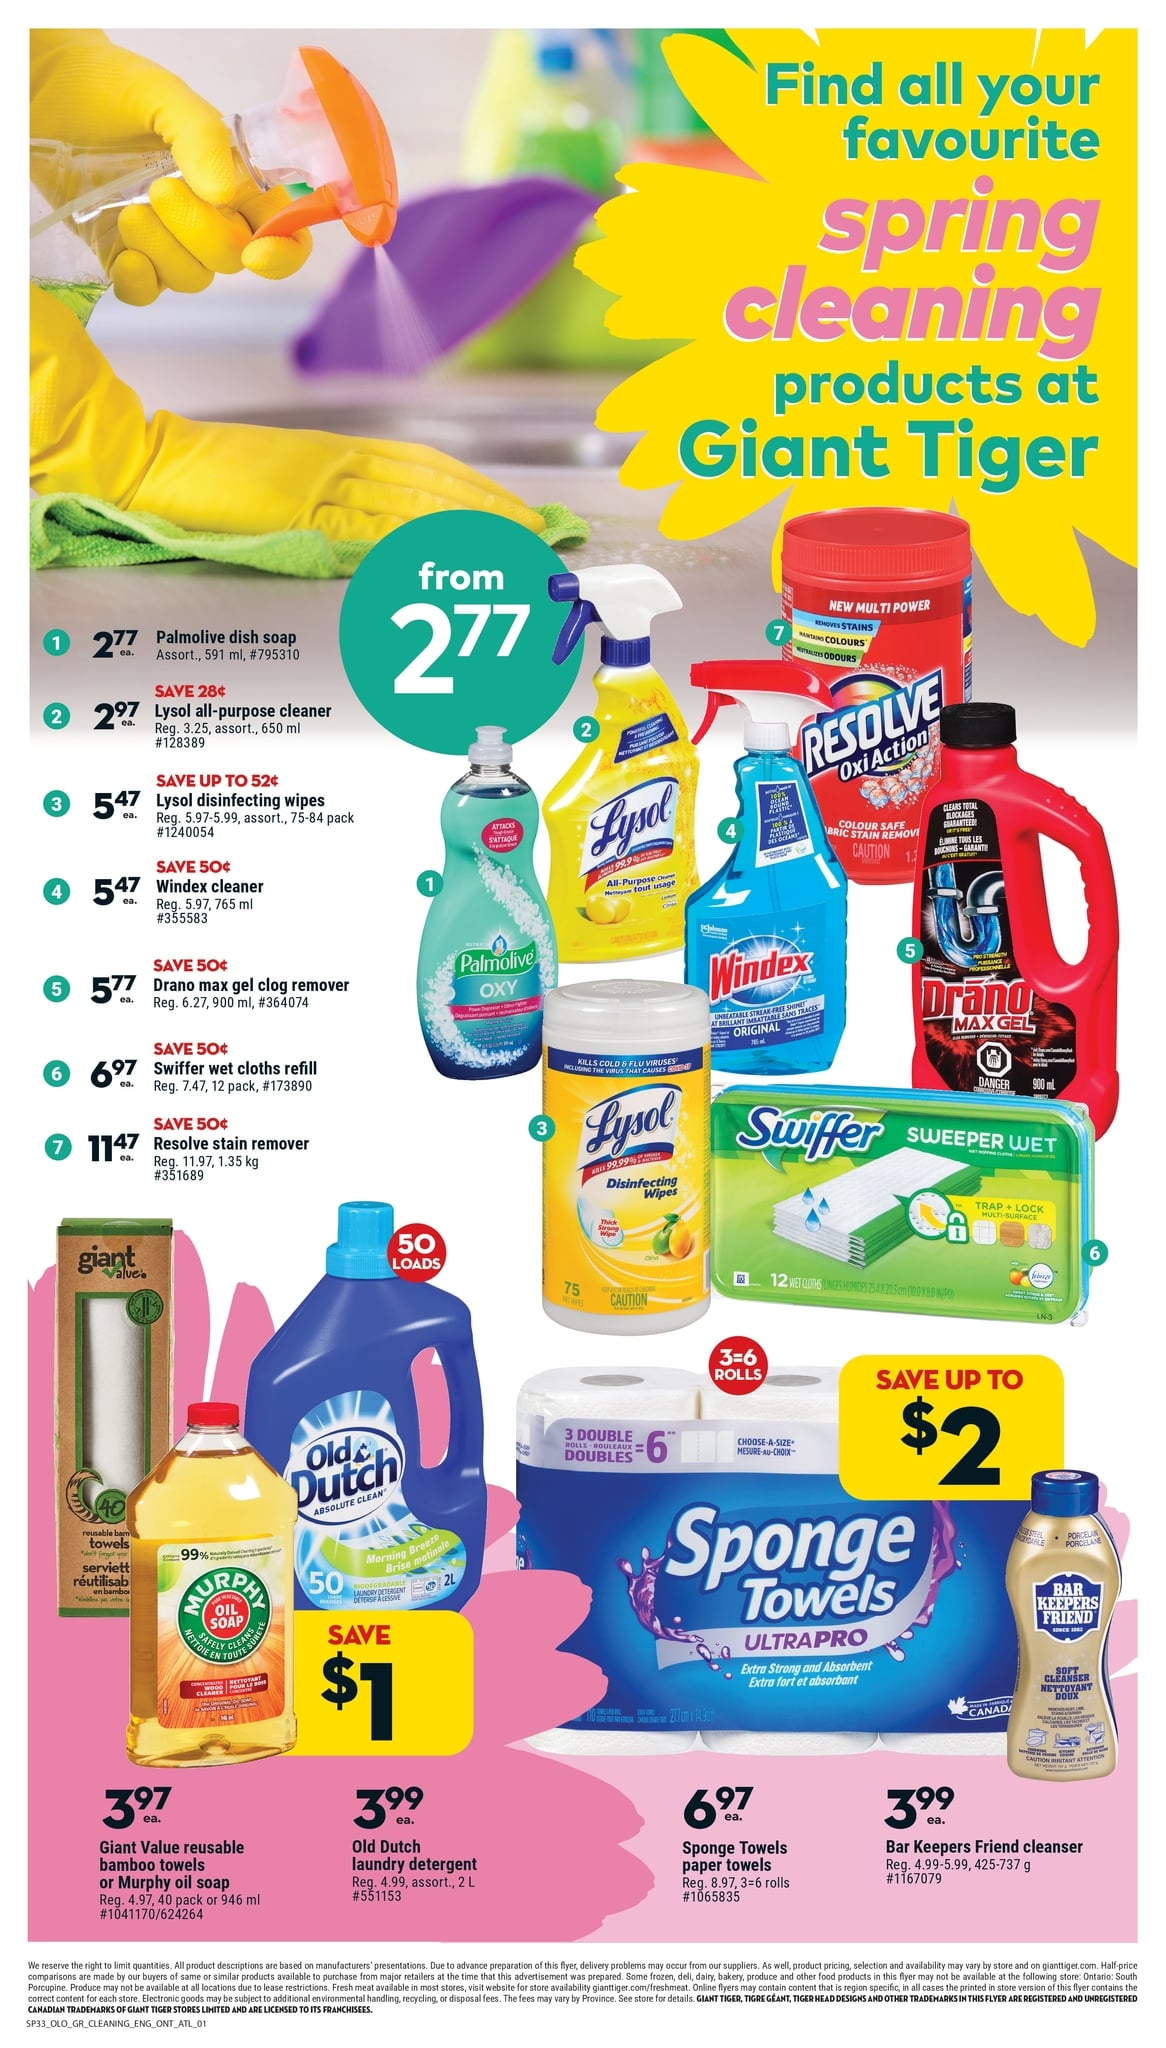 Giant Tiger - Weekly Flyer Specials - Page 5